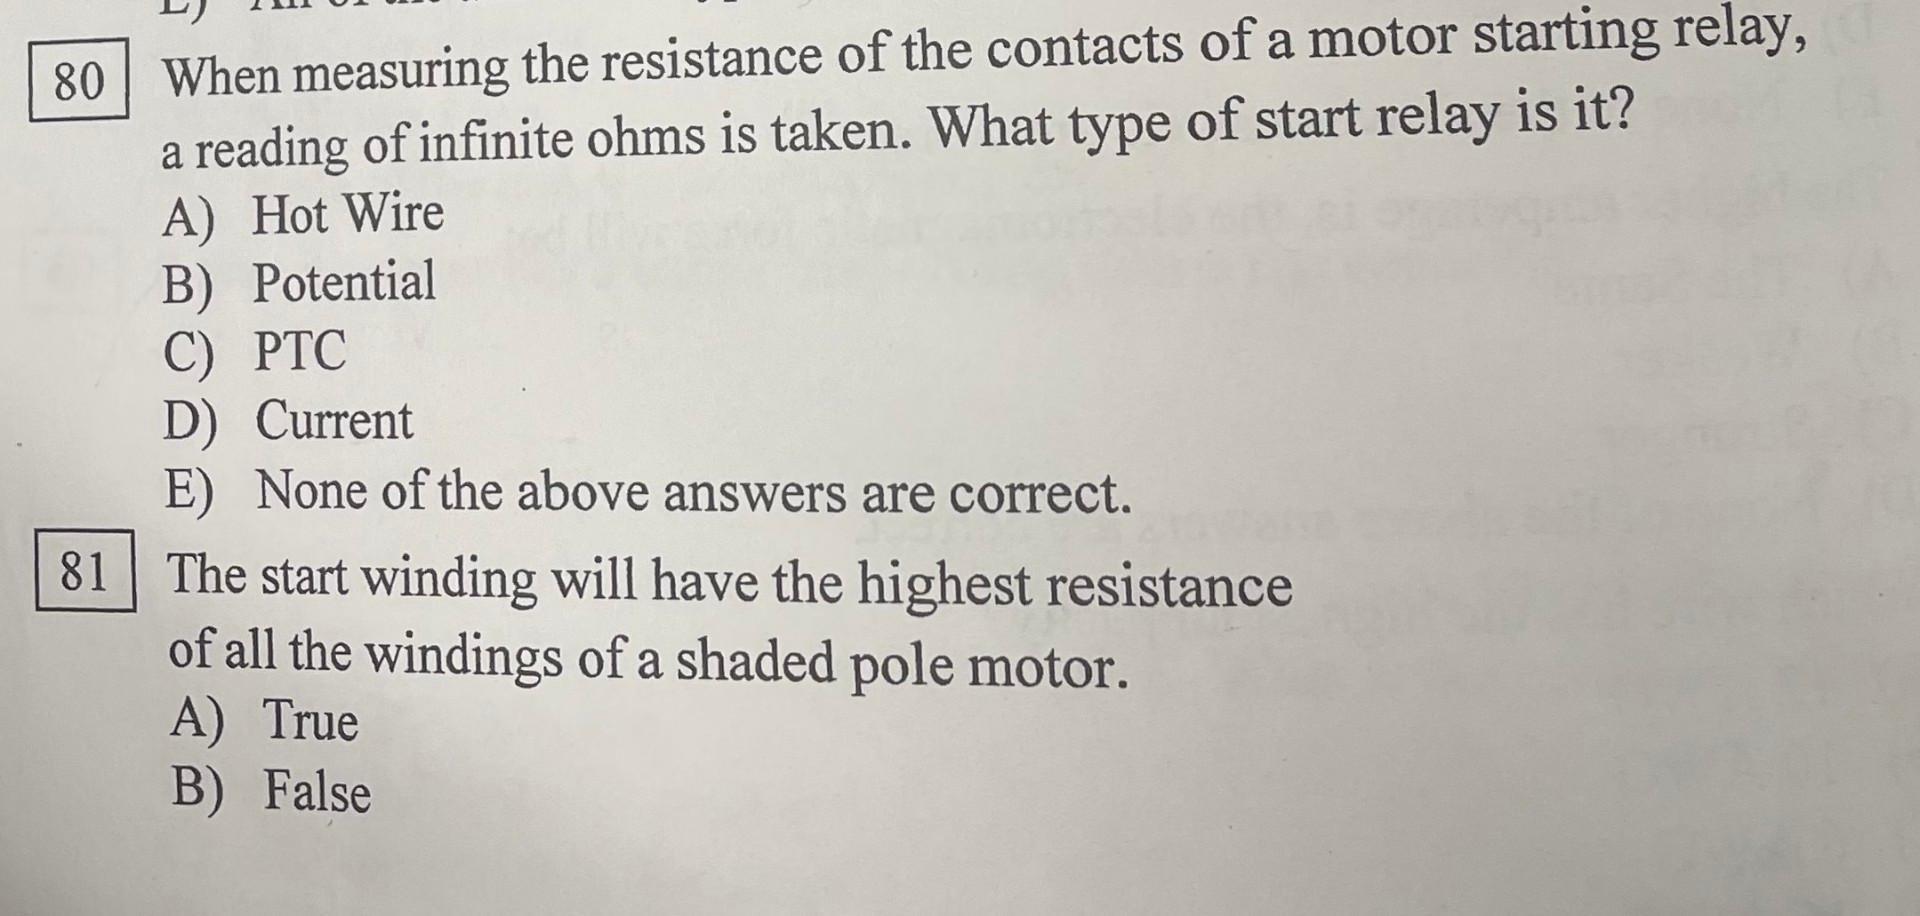 When measuring the resistance of the contacts of a motor starting relay, a reading of infinite ohms is taken. What type of st